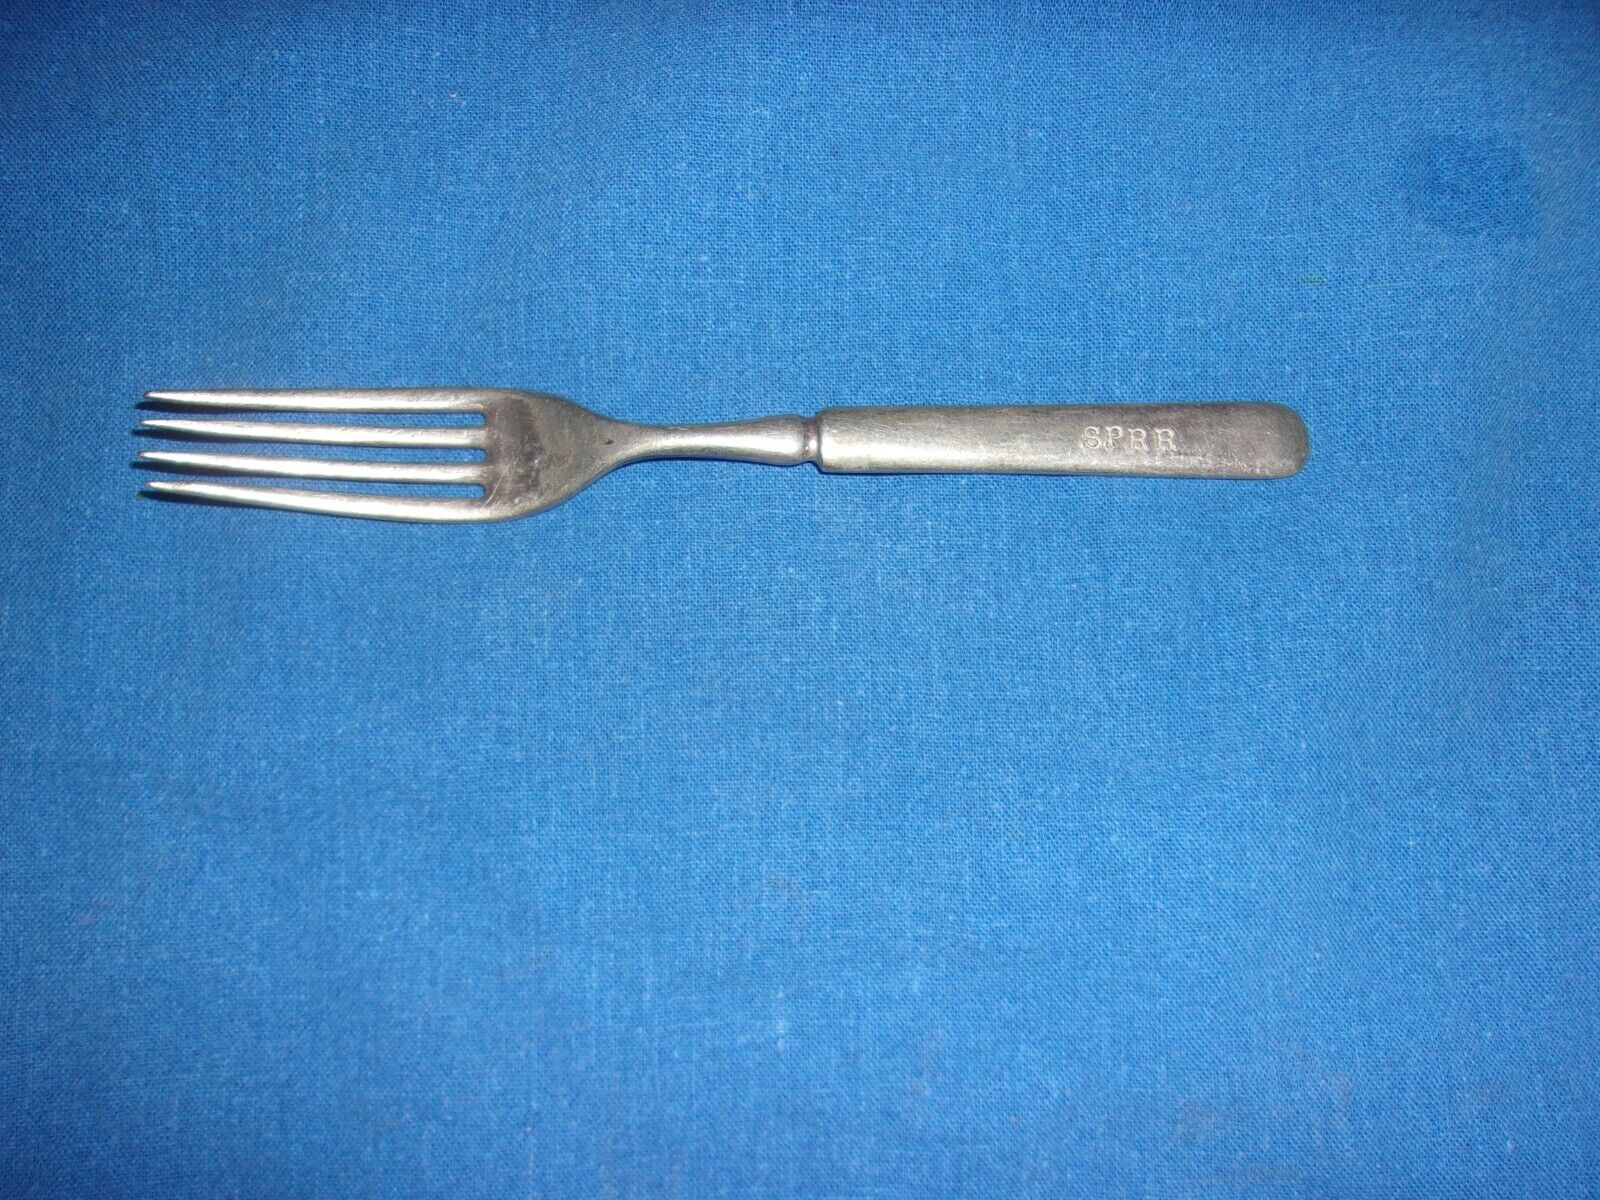 Scarce Antique Victorian SOUTHERN PACIFIC RAILROAD Fork Marked 1847 ROGERS BROS